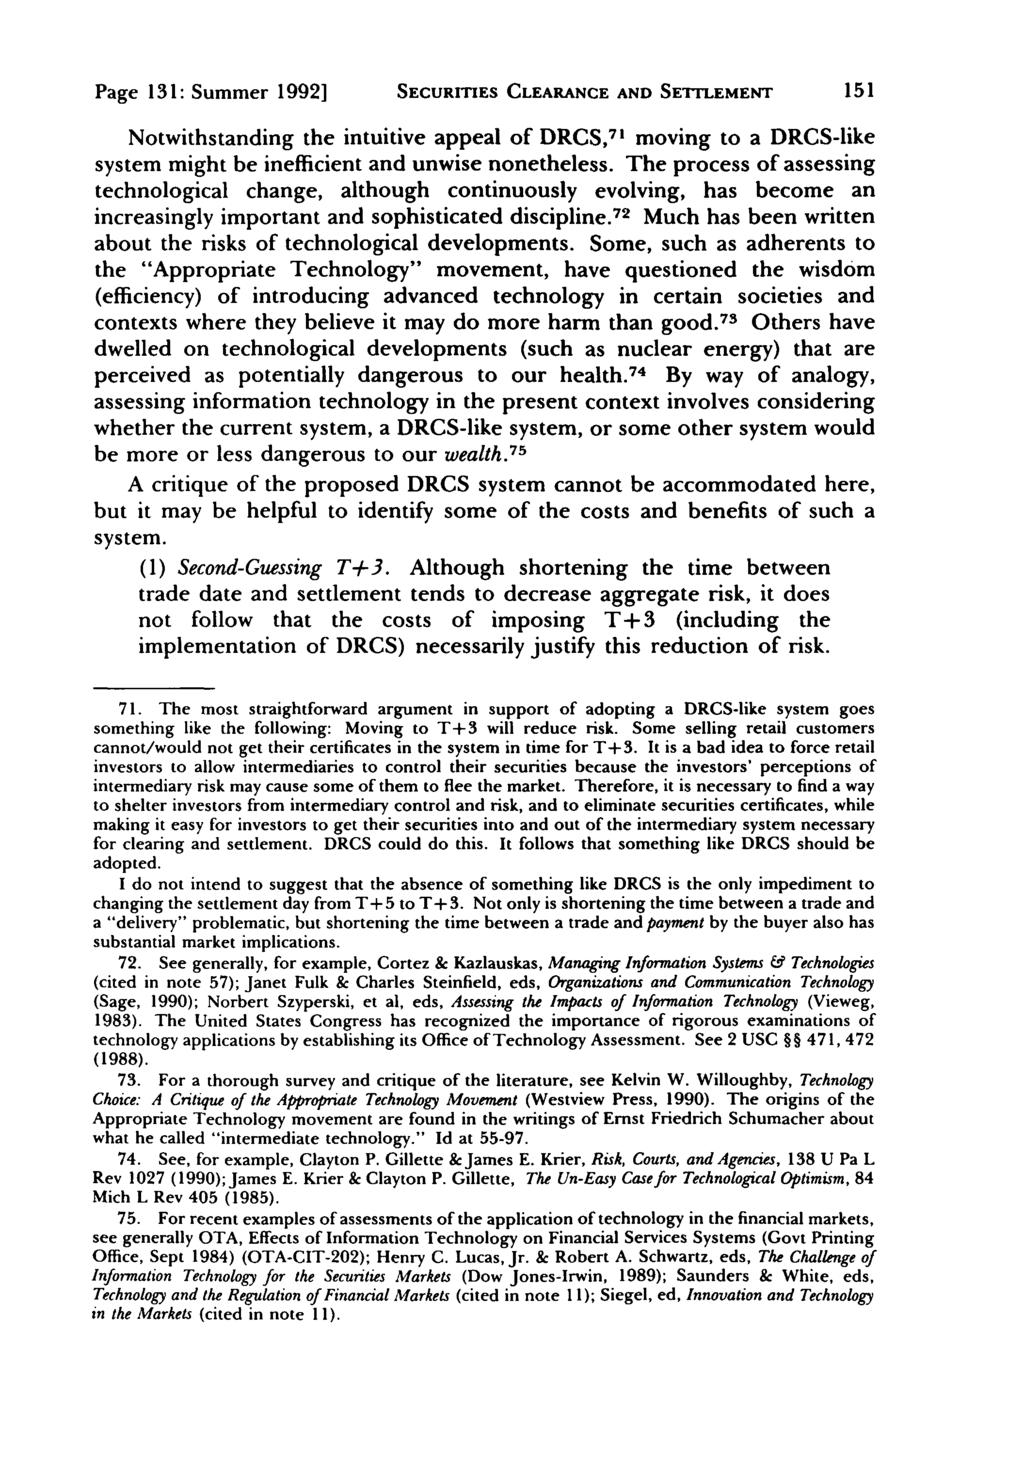 Page 131: Summer 1992] SECURITIES CLEARANCE AND SETTLEMENT Notwithstanding the intuitive appeal of DRCS, 7 1 moving to a DRCS-like system might be inefficient and unwise nonetheless.